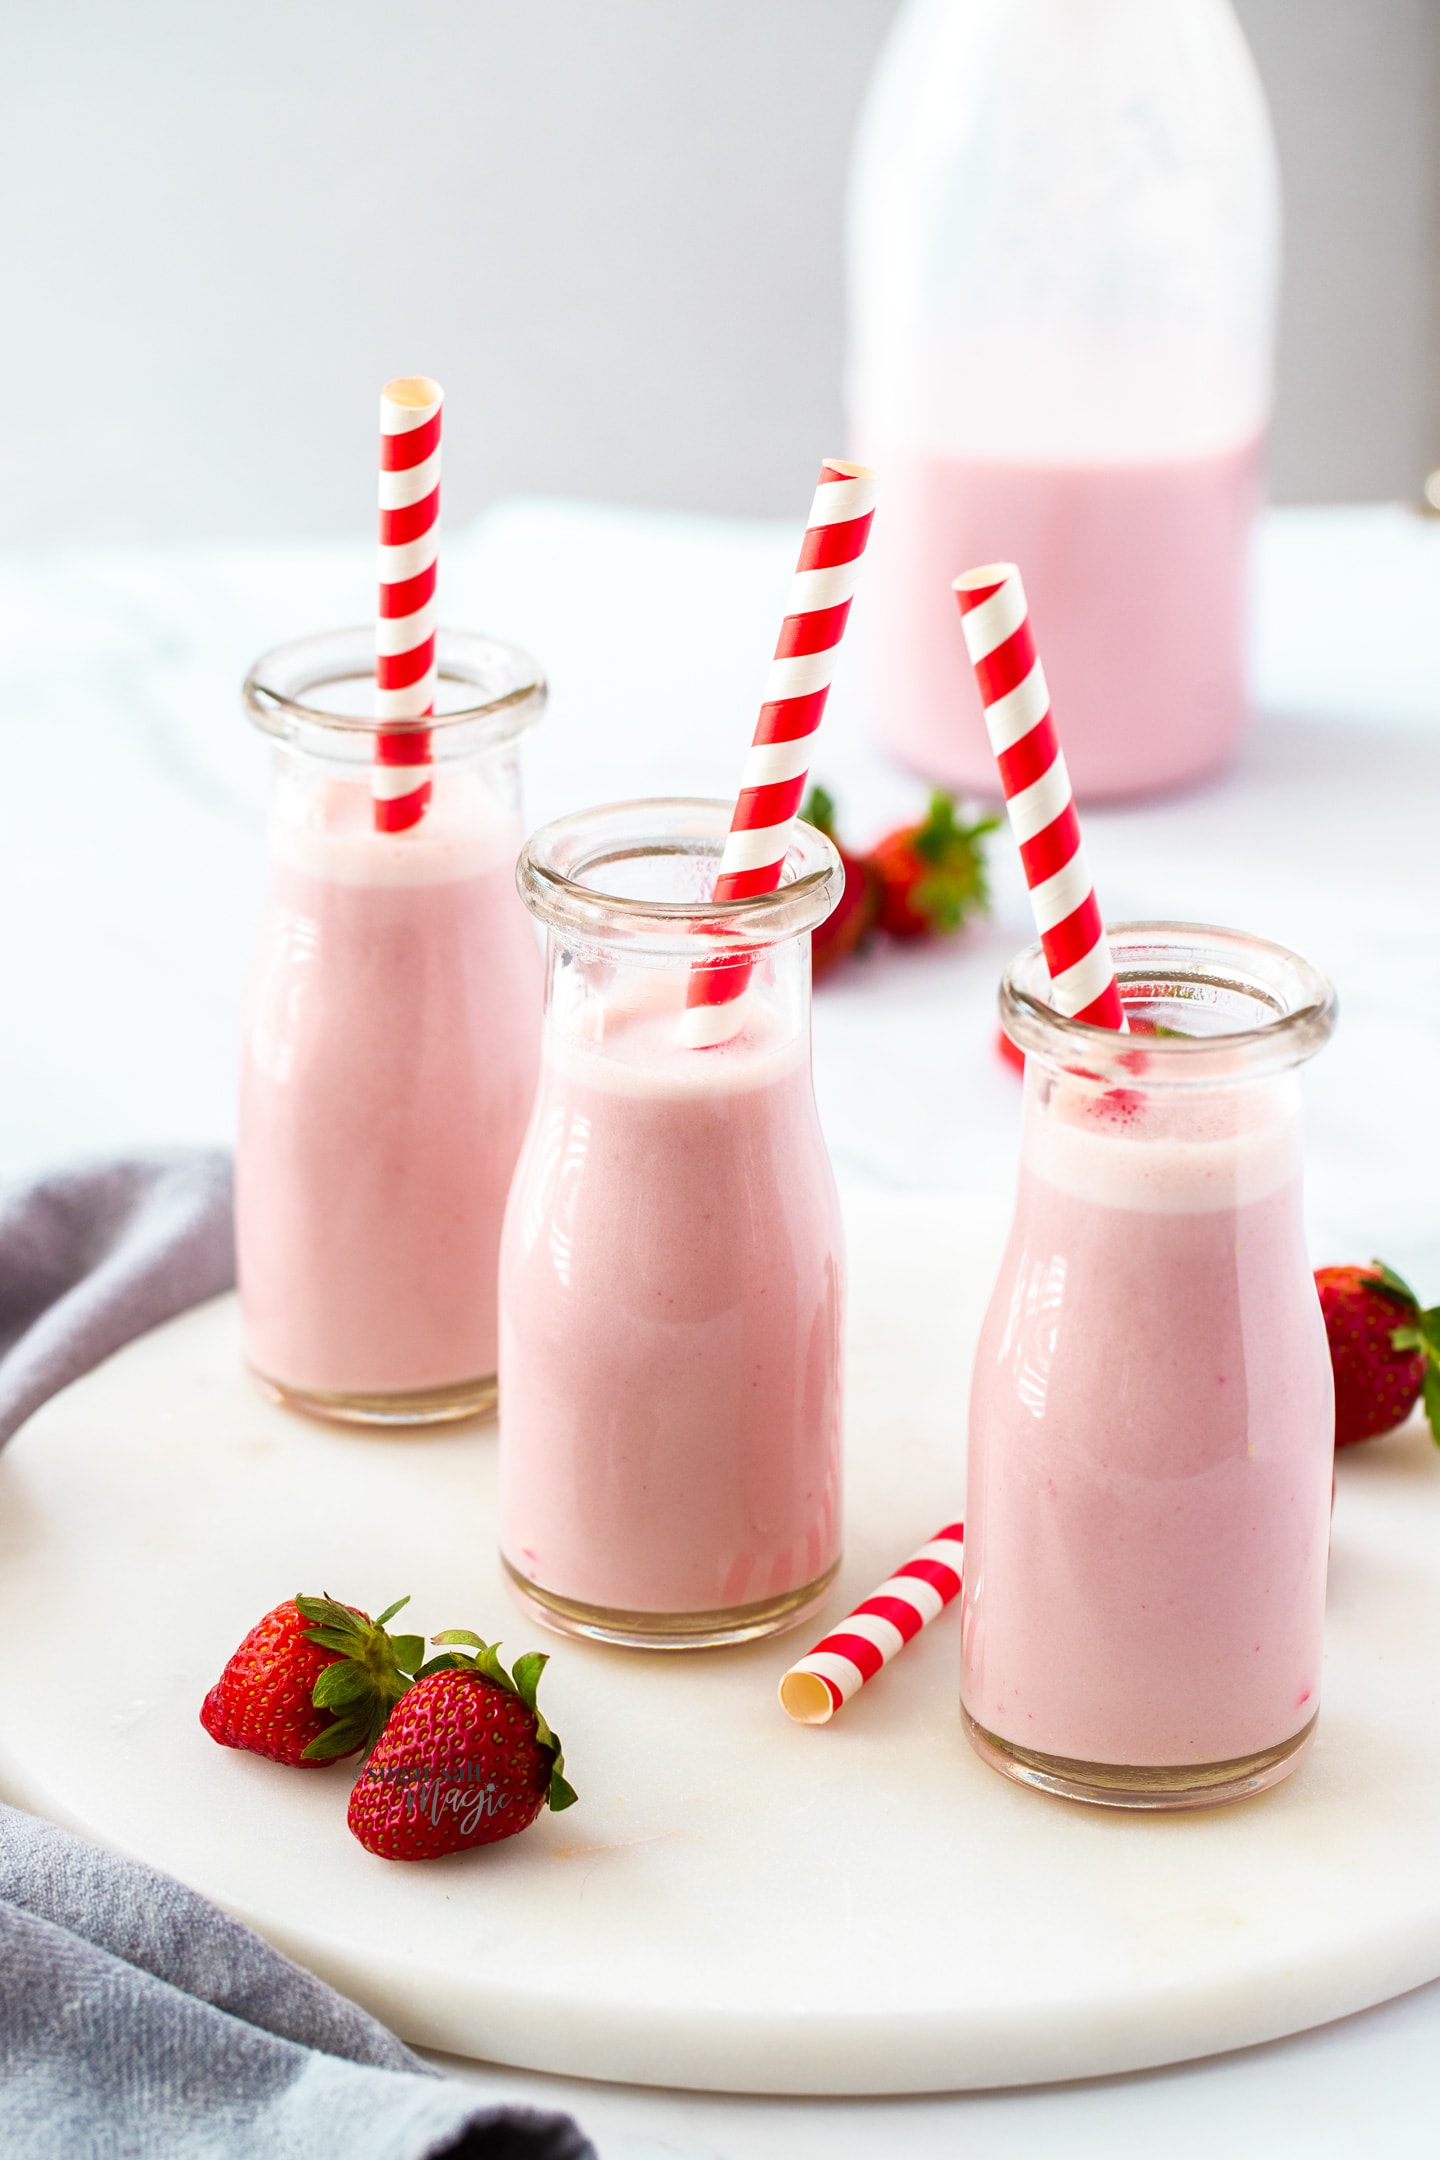 3 miniature milk bottles filled with strawberry milk with stripy red straws.